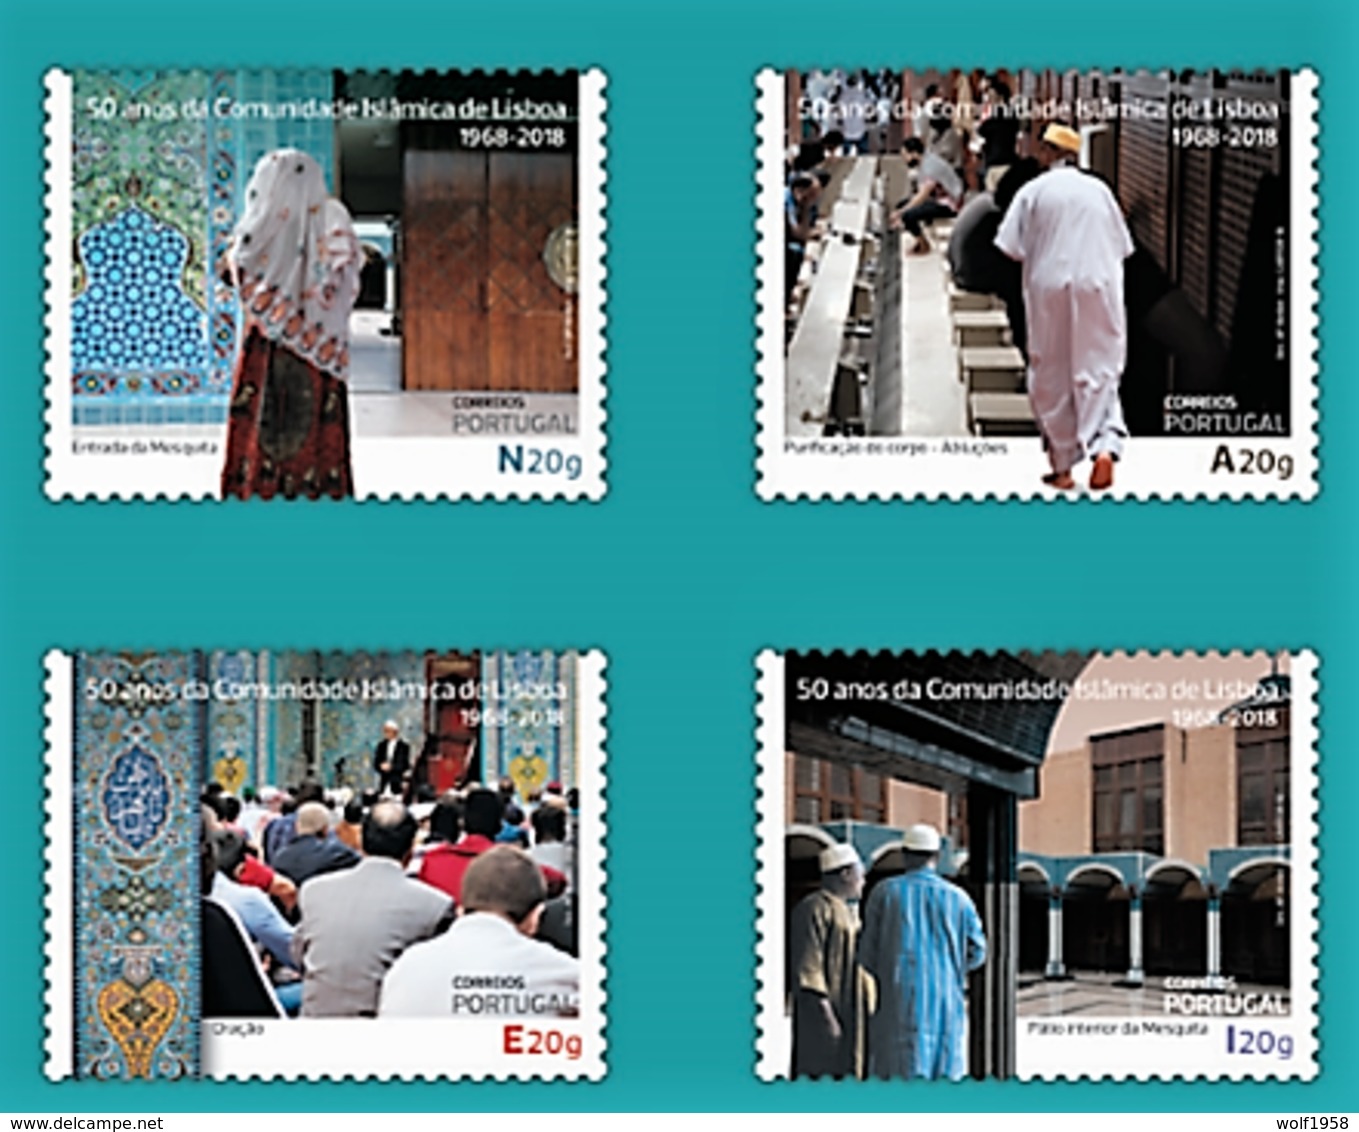 PORTUGAL 50 YEARS OF ISLAMIC COMMUNITY OF LISBON 4 MNH STAMPS SET 2018 - Gebraucht